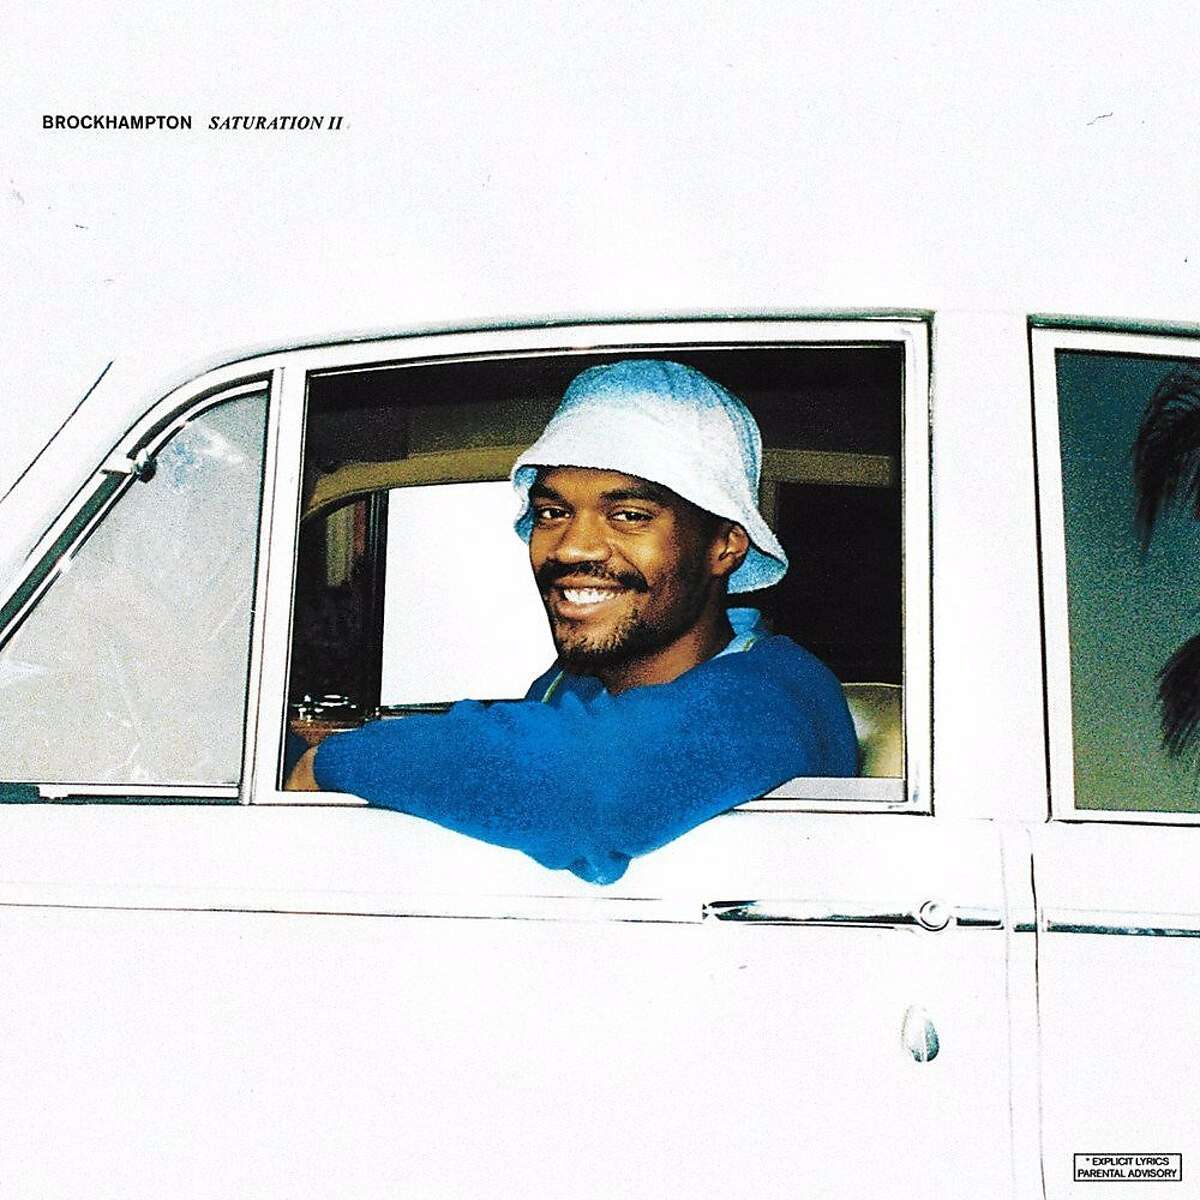 Brockhampton's second album, "Saturation II," was released in August, just two months after their debut release.